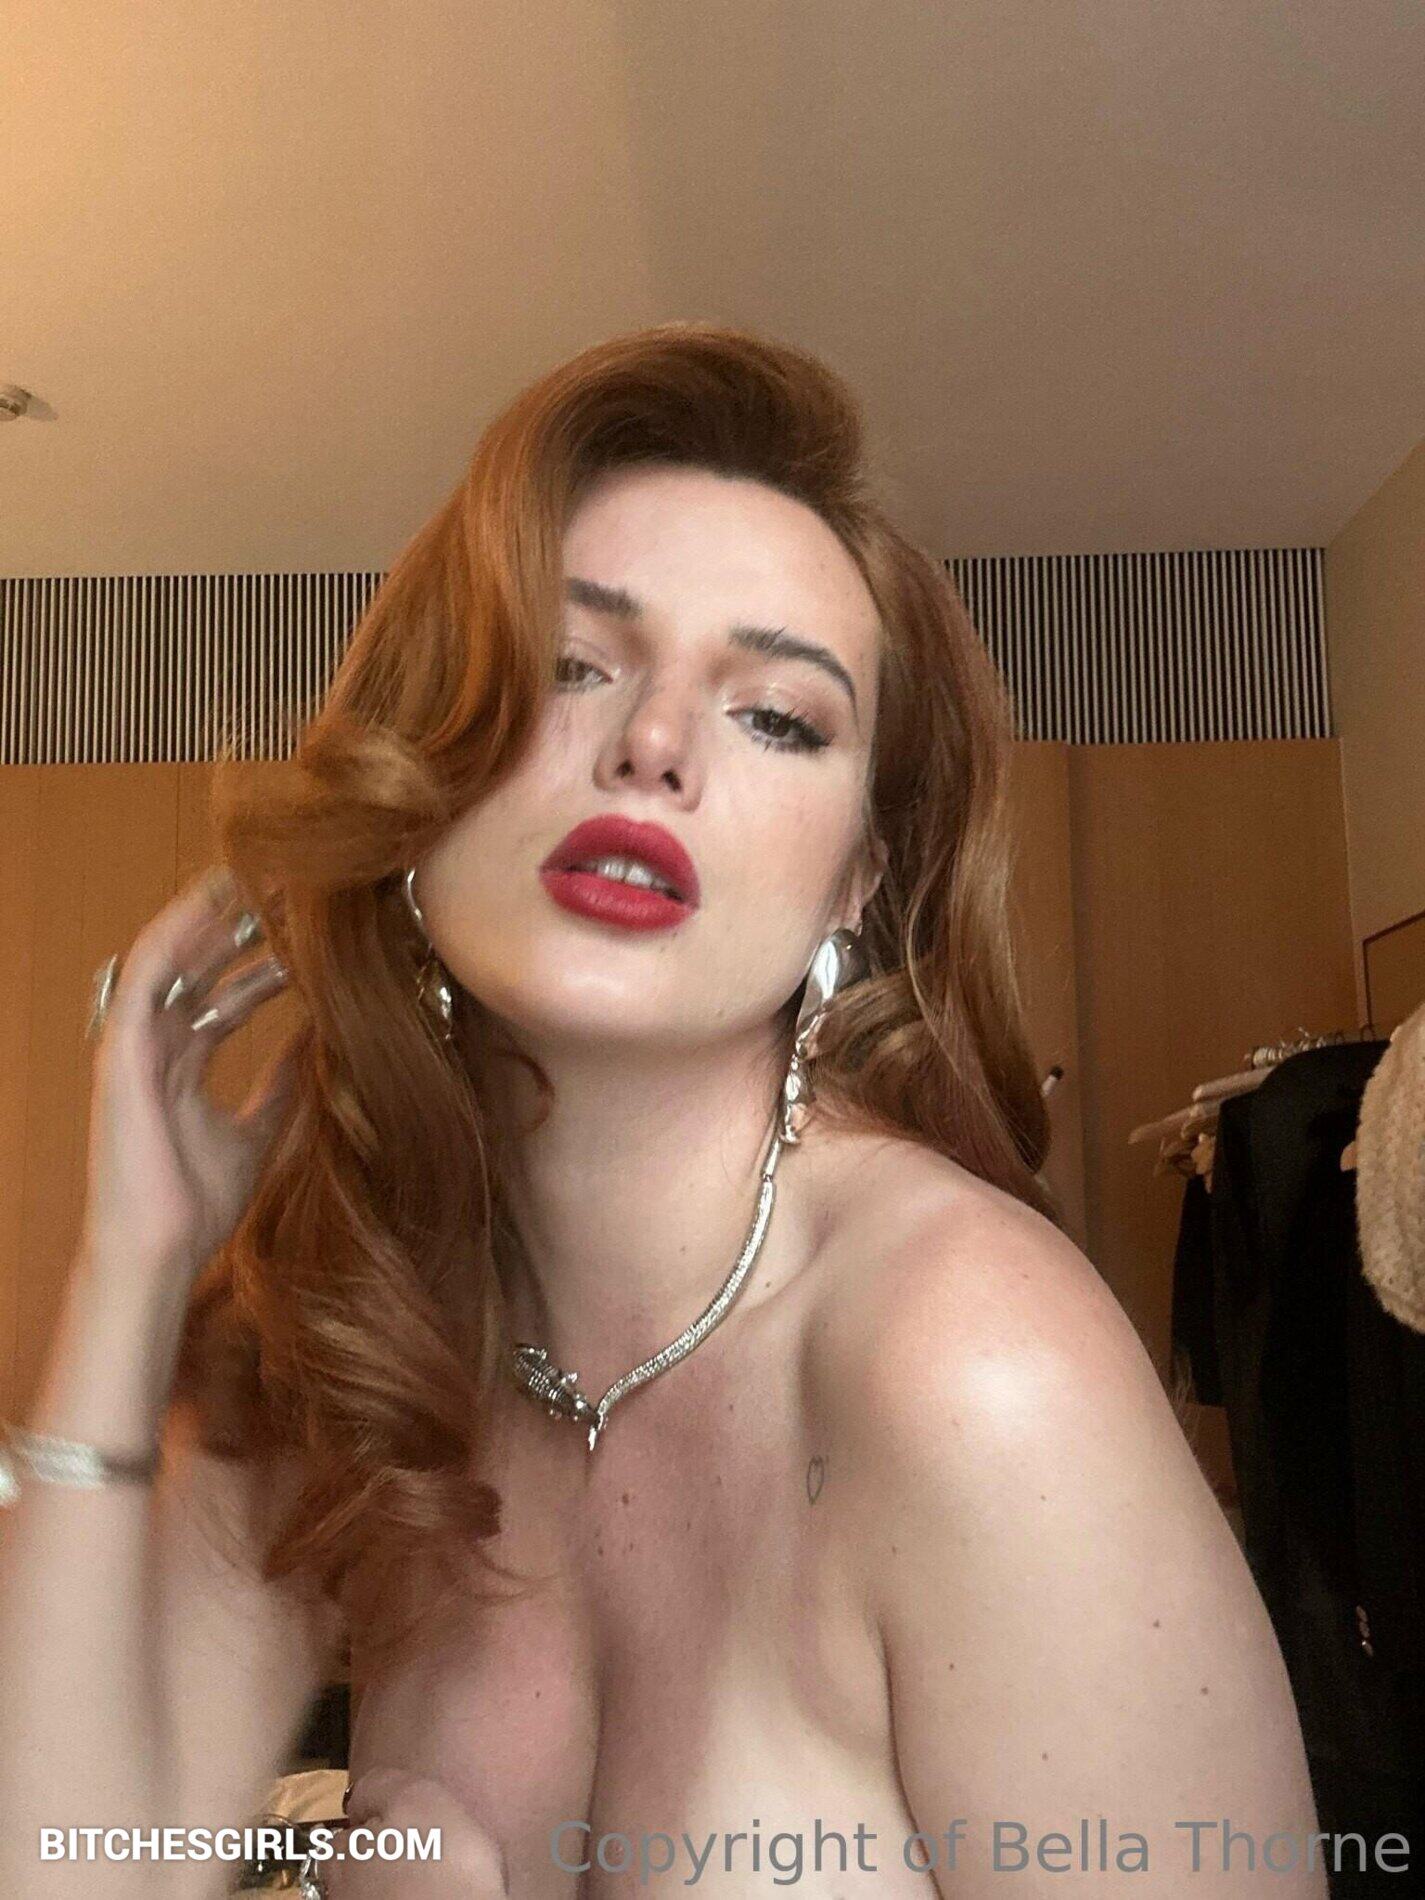 dc campbell share bella thorne nude playboy photos